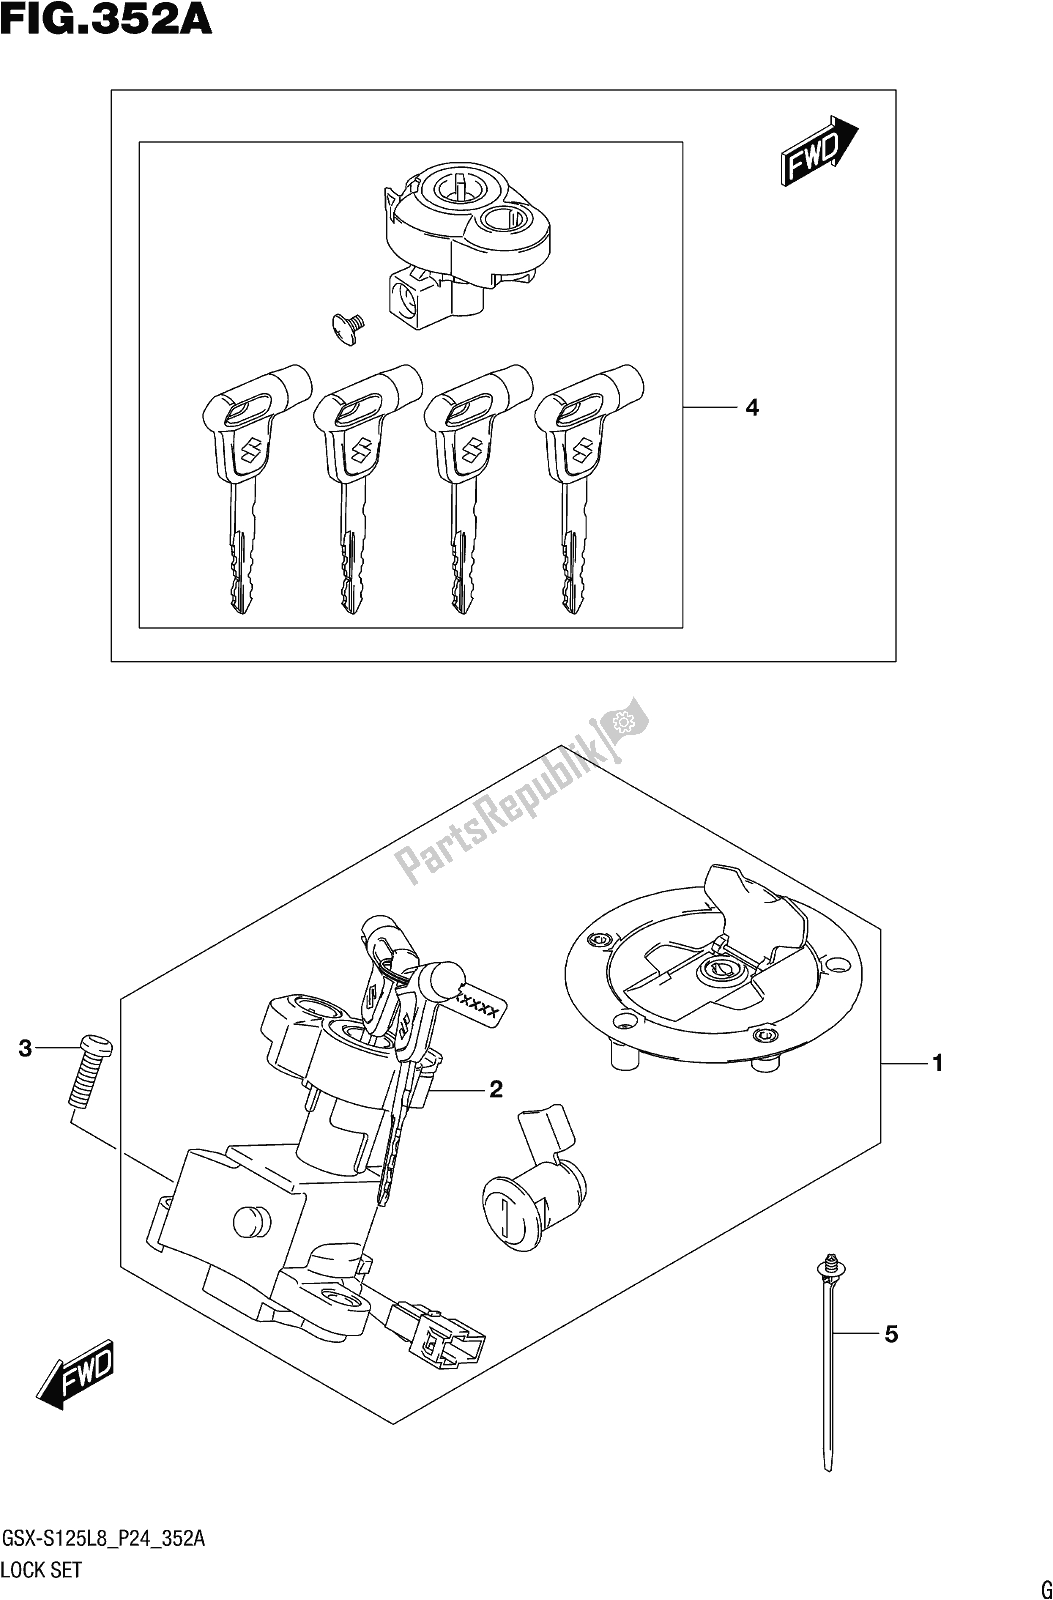 All parts for the Fig. 352a Lock Set of the Suzuki Gsx-s 125 MLX 2018